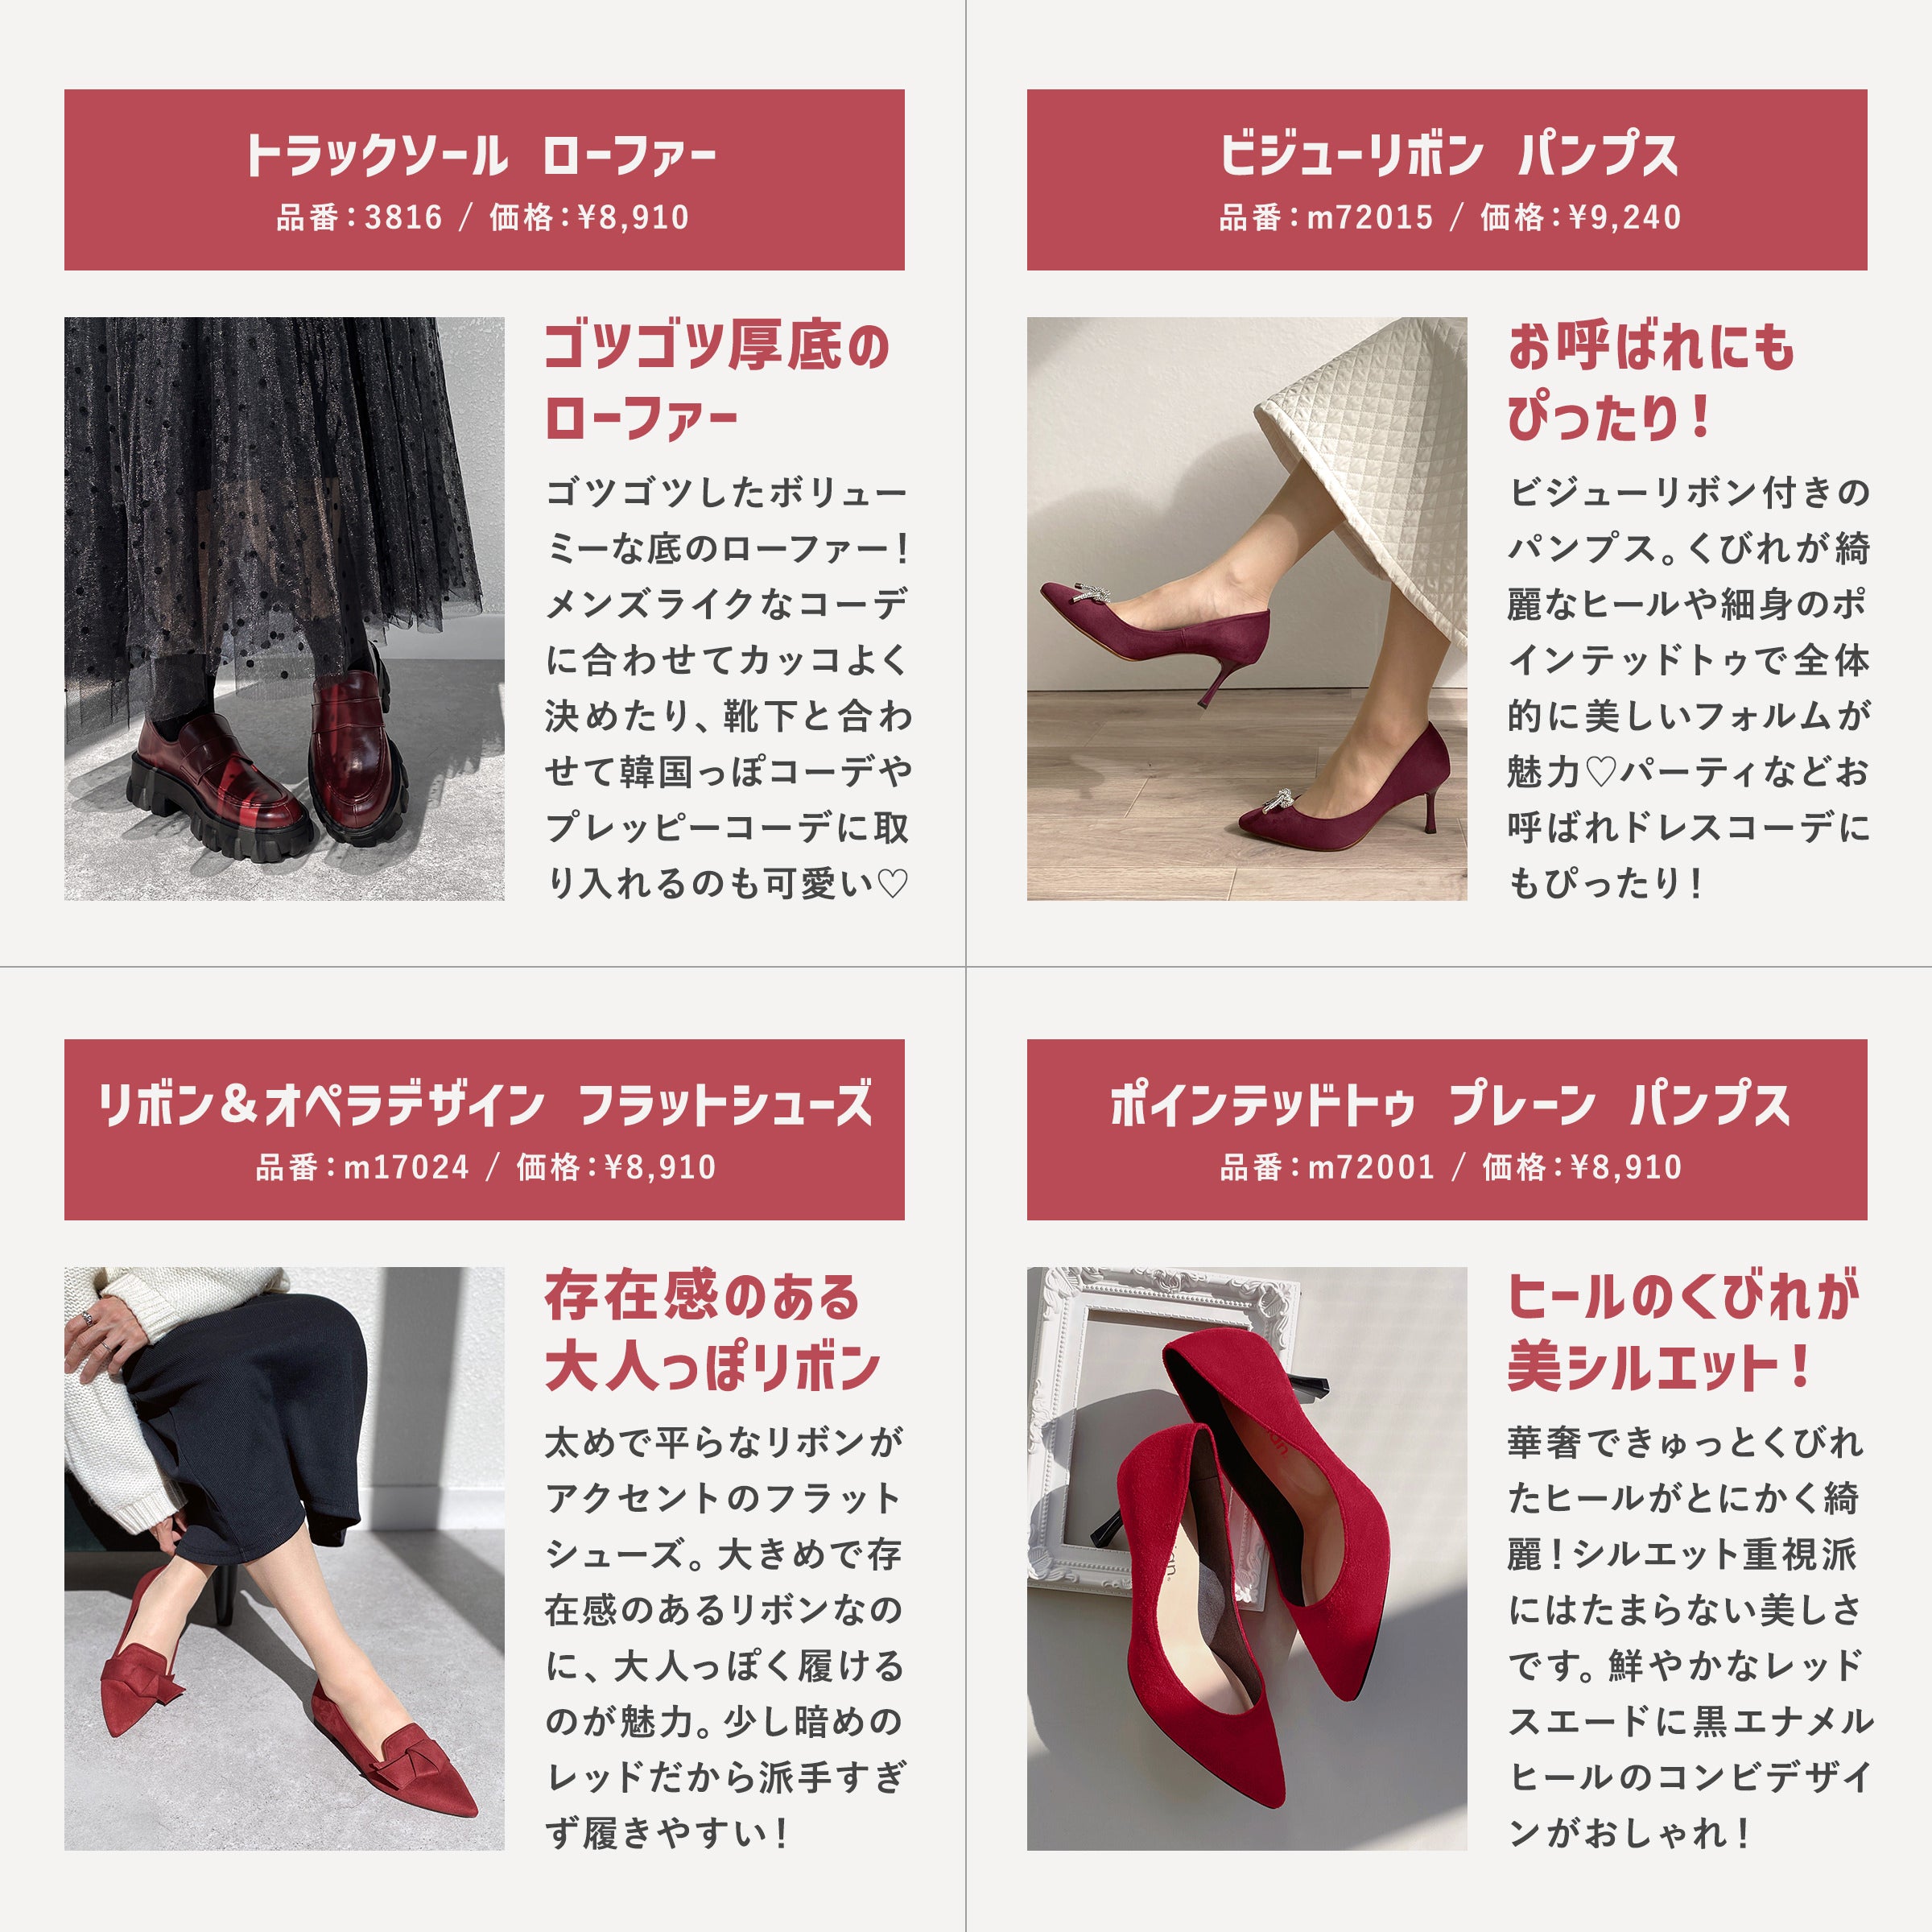 Special feature on red shoes, an elegant and coveted color